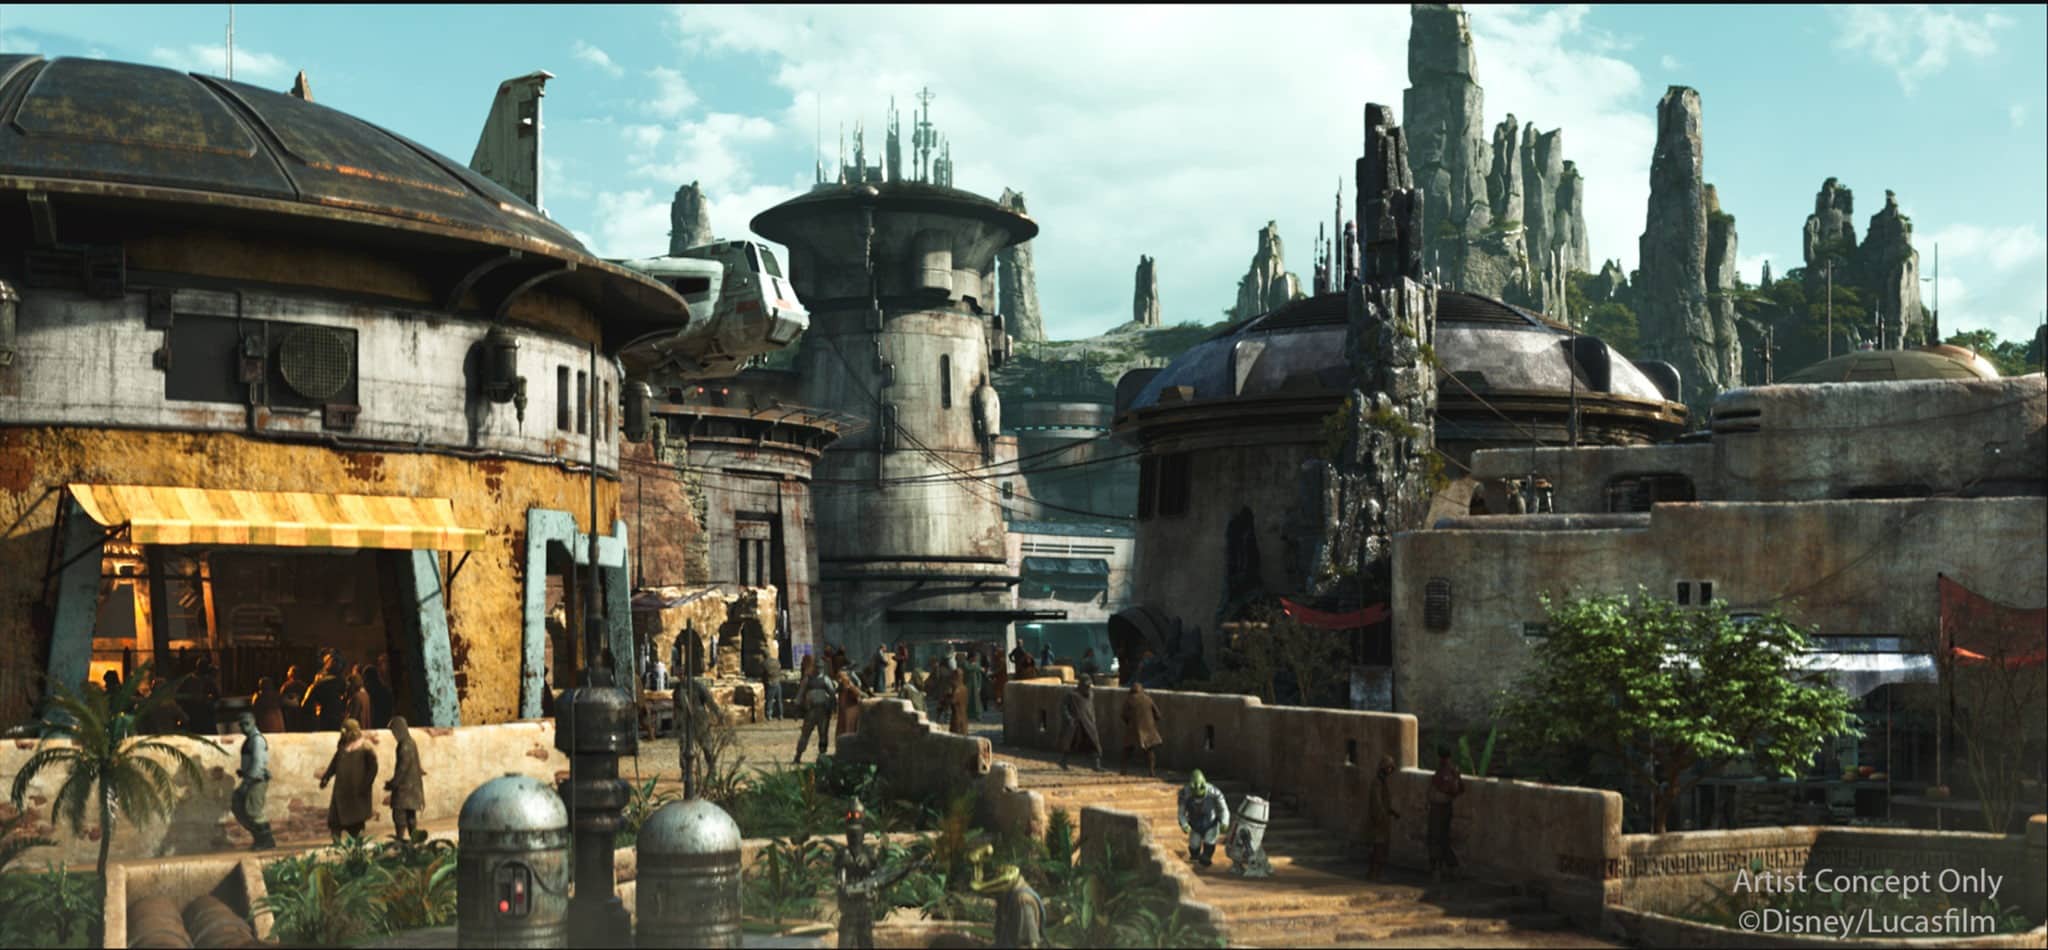 Black Spire Outpost is the name of the village inside of the upcoming